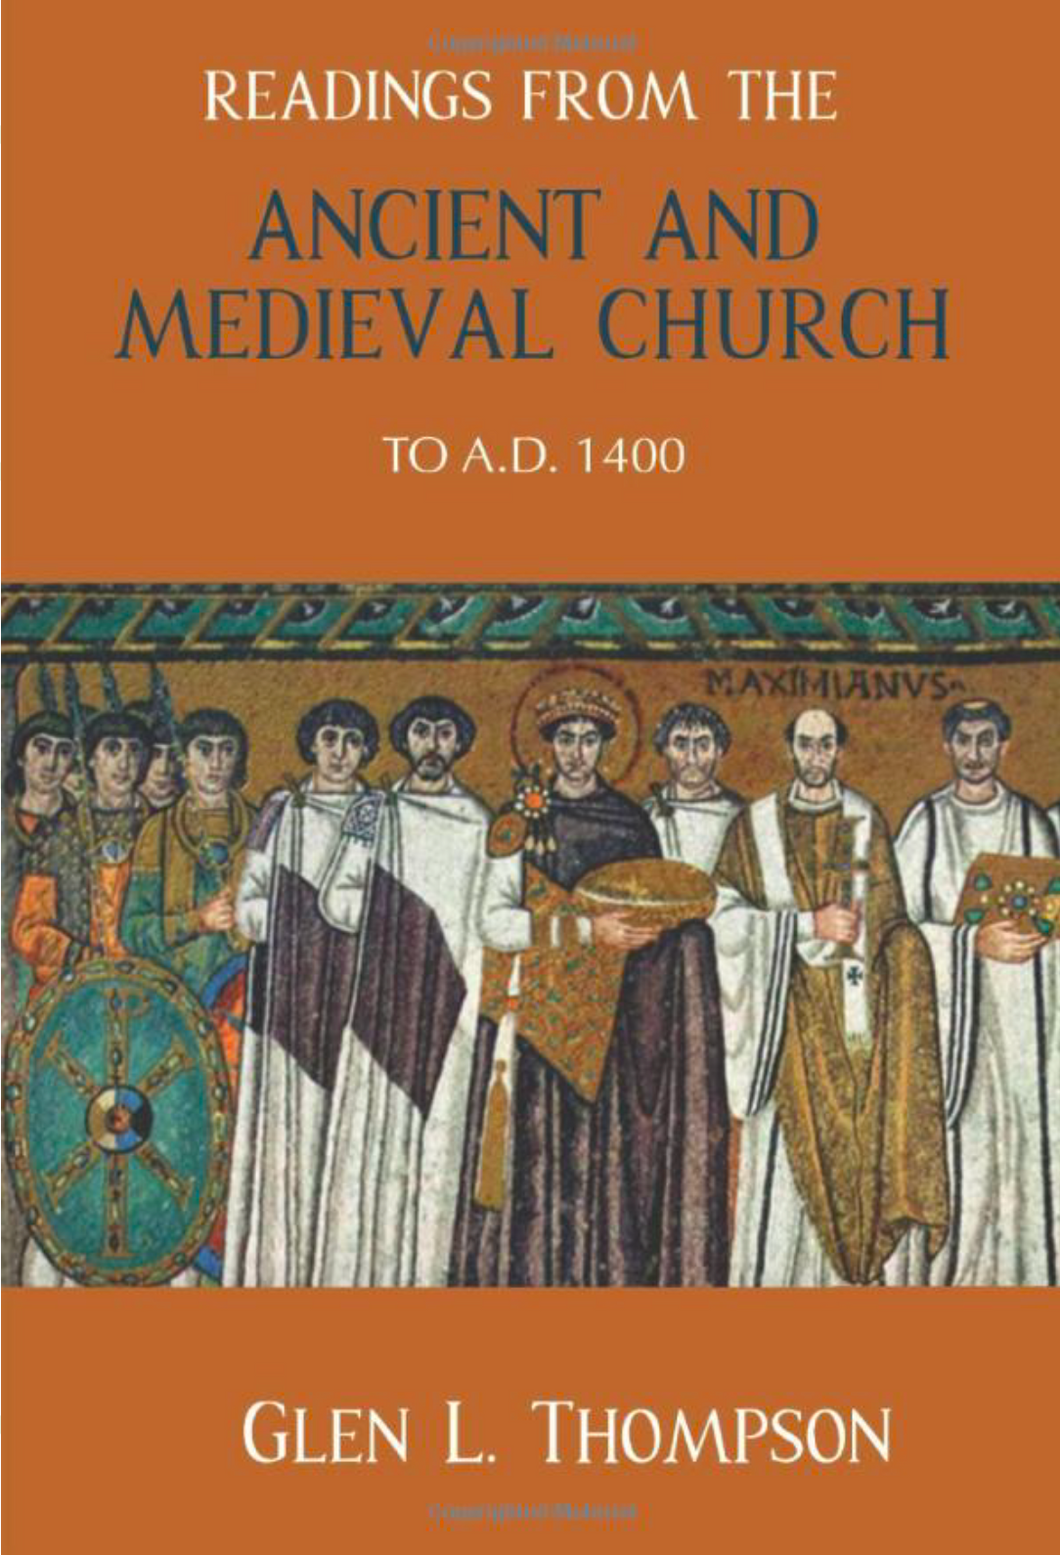 READINGS FROM THE ANCIENT AND MEDIEVAL CHURCH